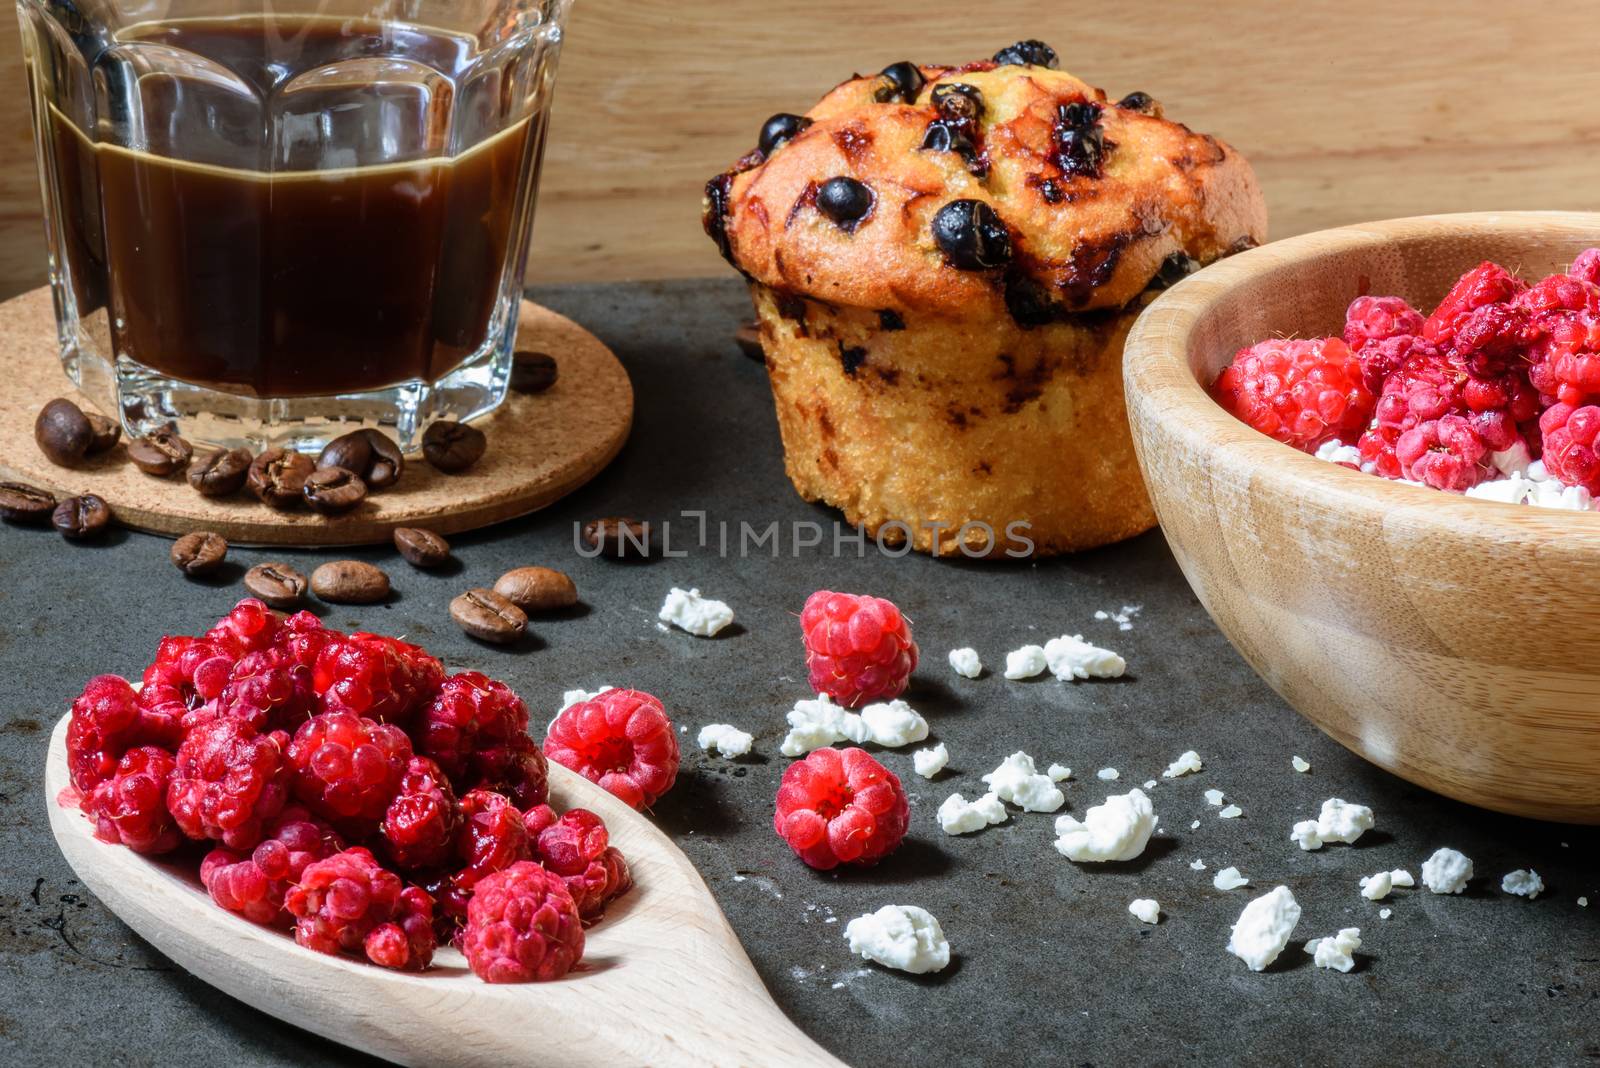 Cottage cheese with raspberries, coffee in a cup and blueberry muffin for breakfast with scattered berries, grains of curd and coffee beans